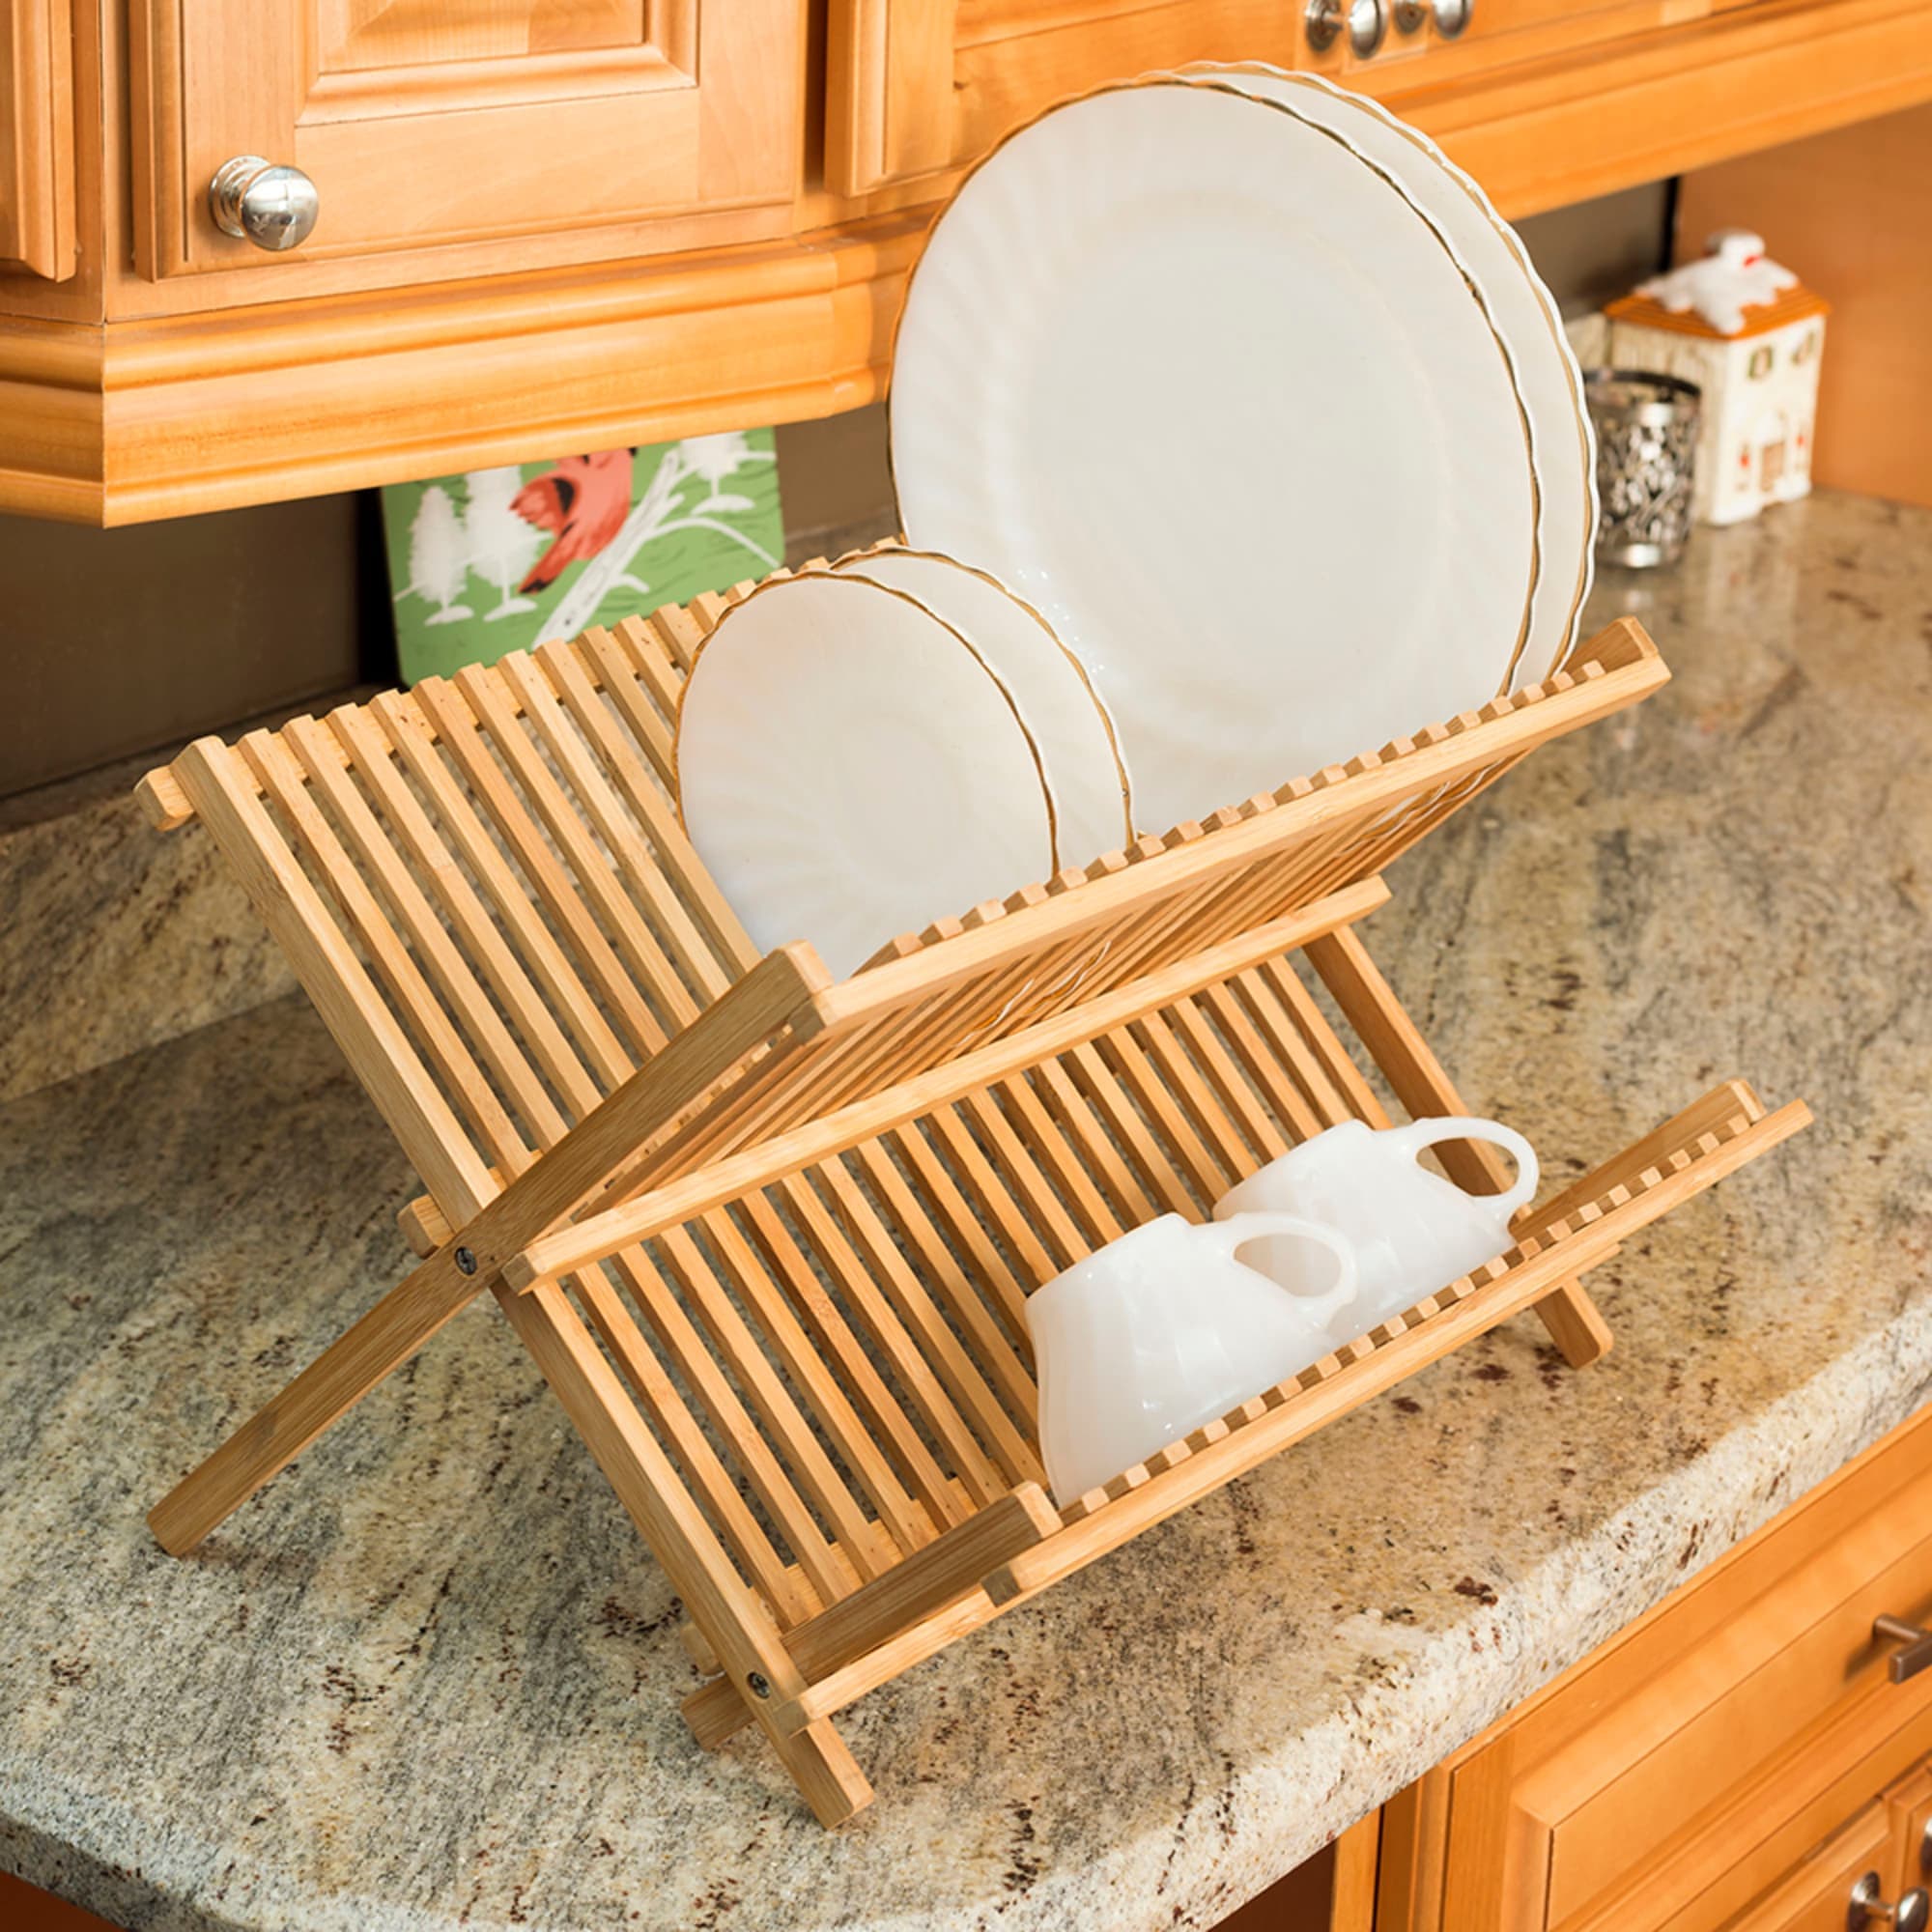 Home Basics Bamboo Foldable Dish Drainer $8.00 EACH, CASE PACK OF 12